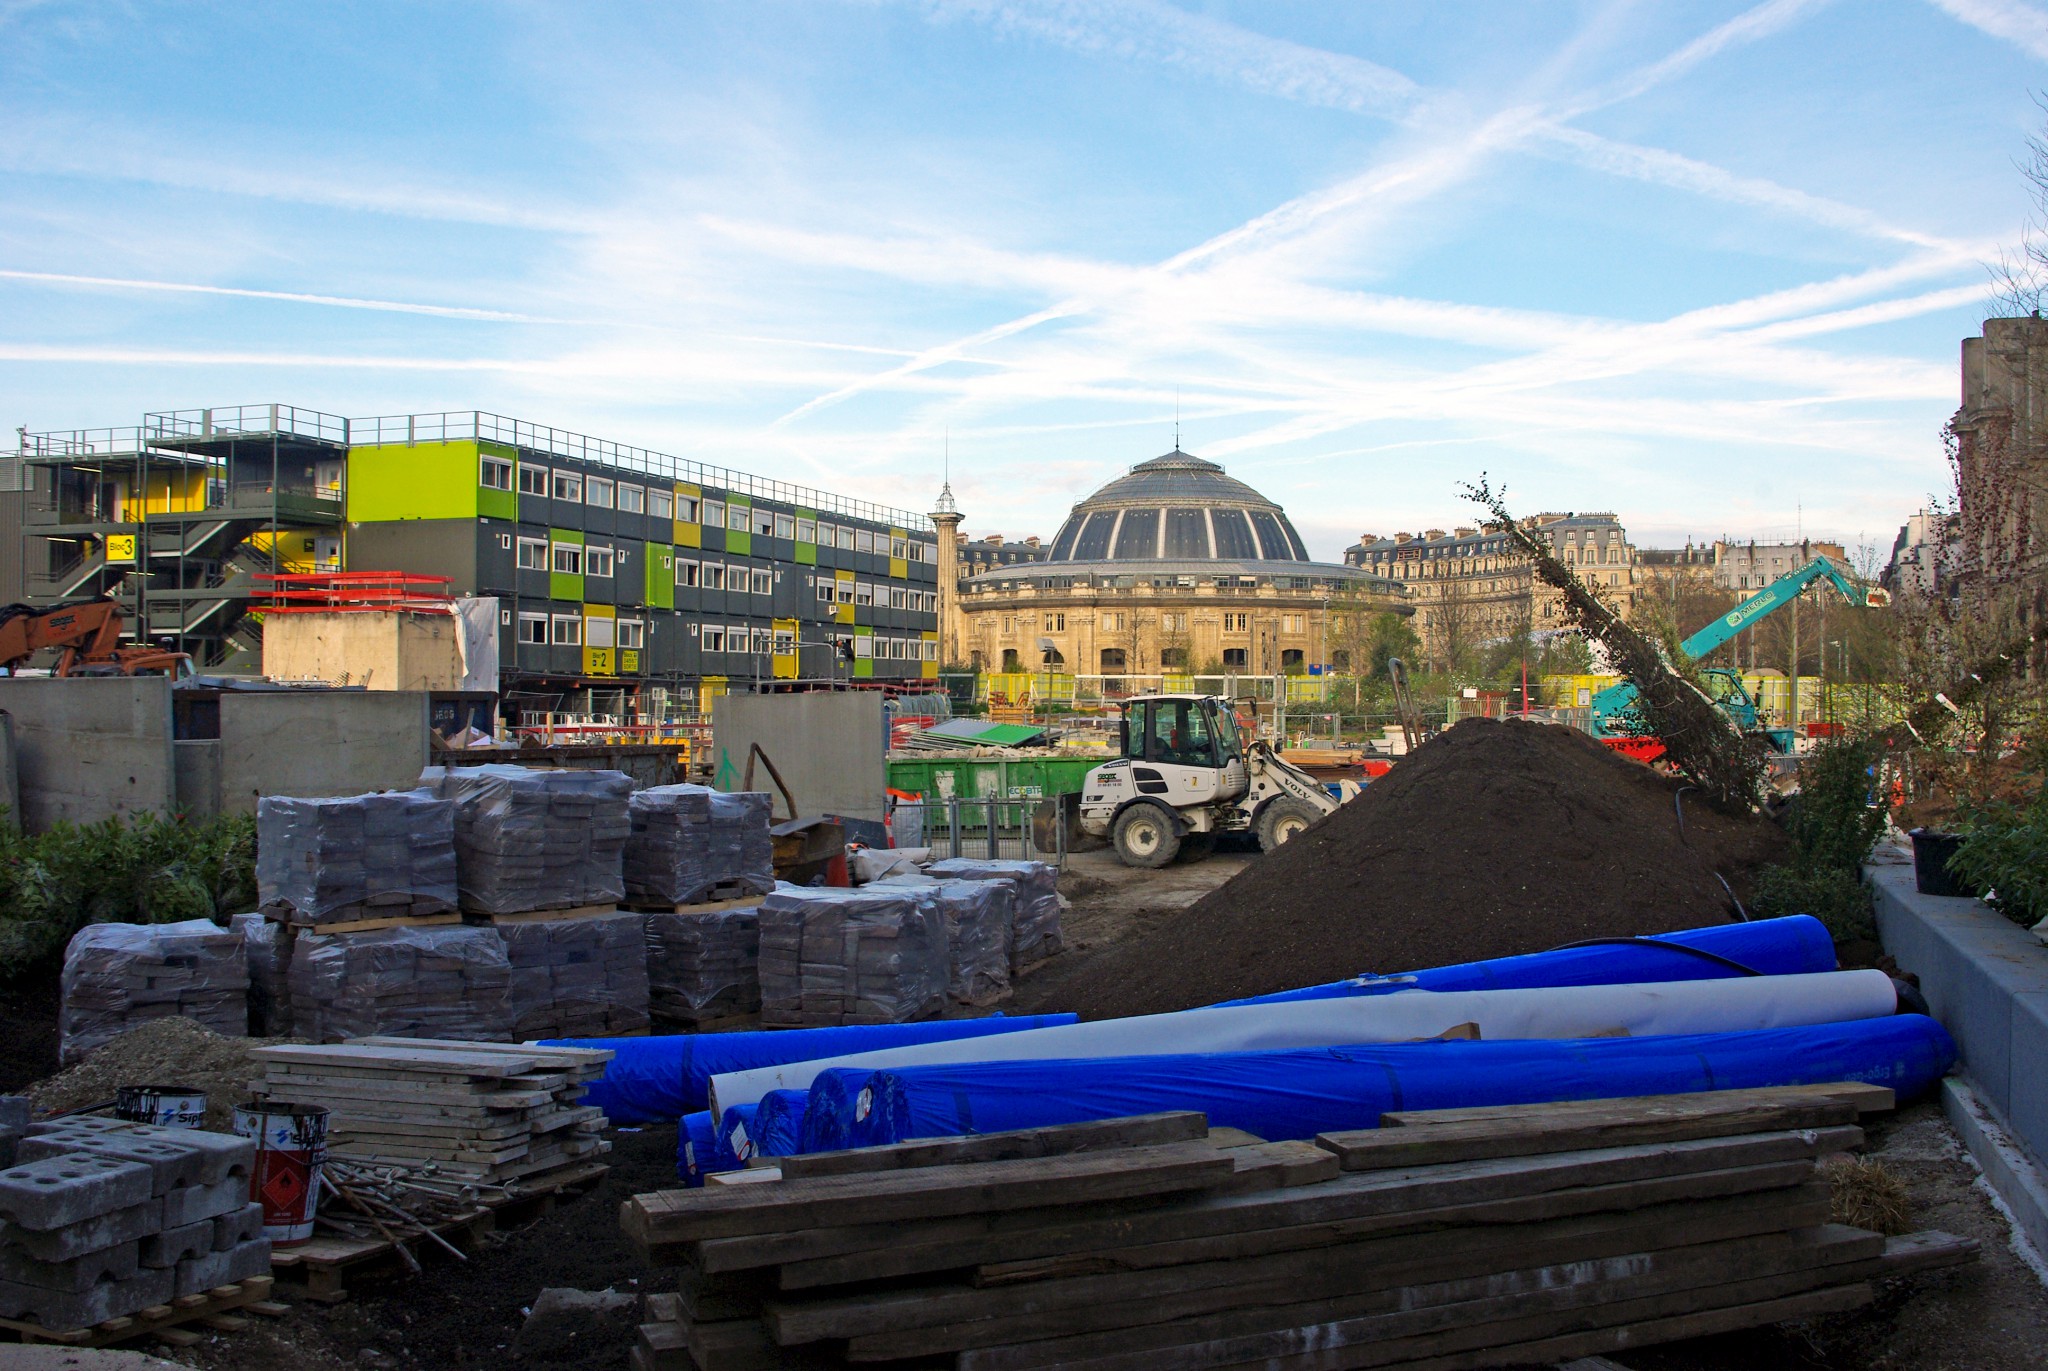 Work in progress at Les Halles, Paris © French Moments